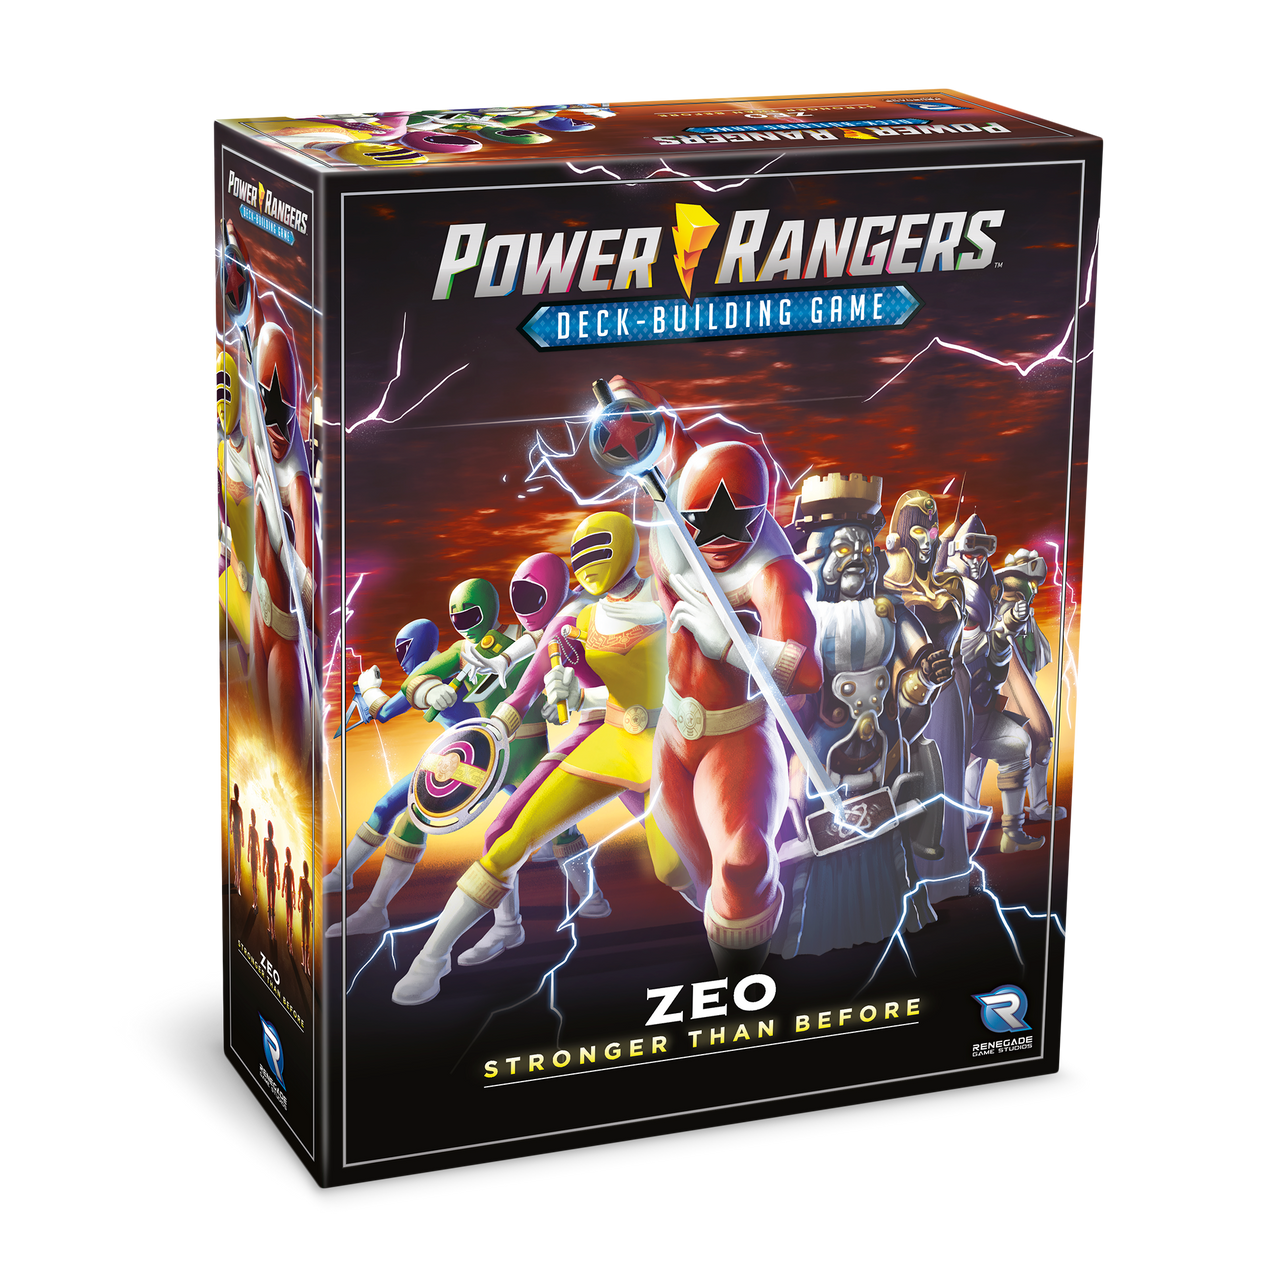 Power Rangers Deck-Building Game Zeo: Stronger Than Before